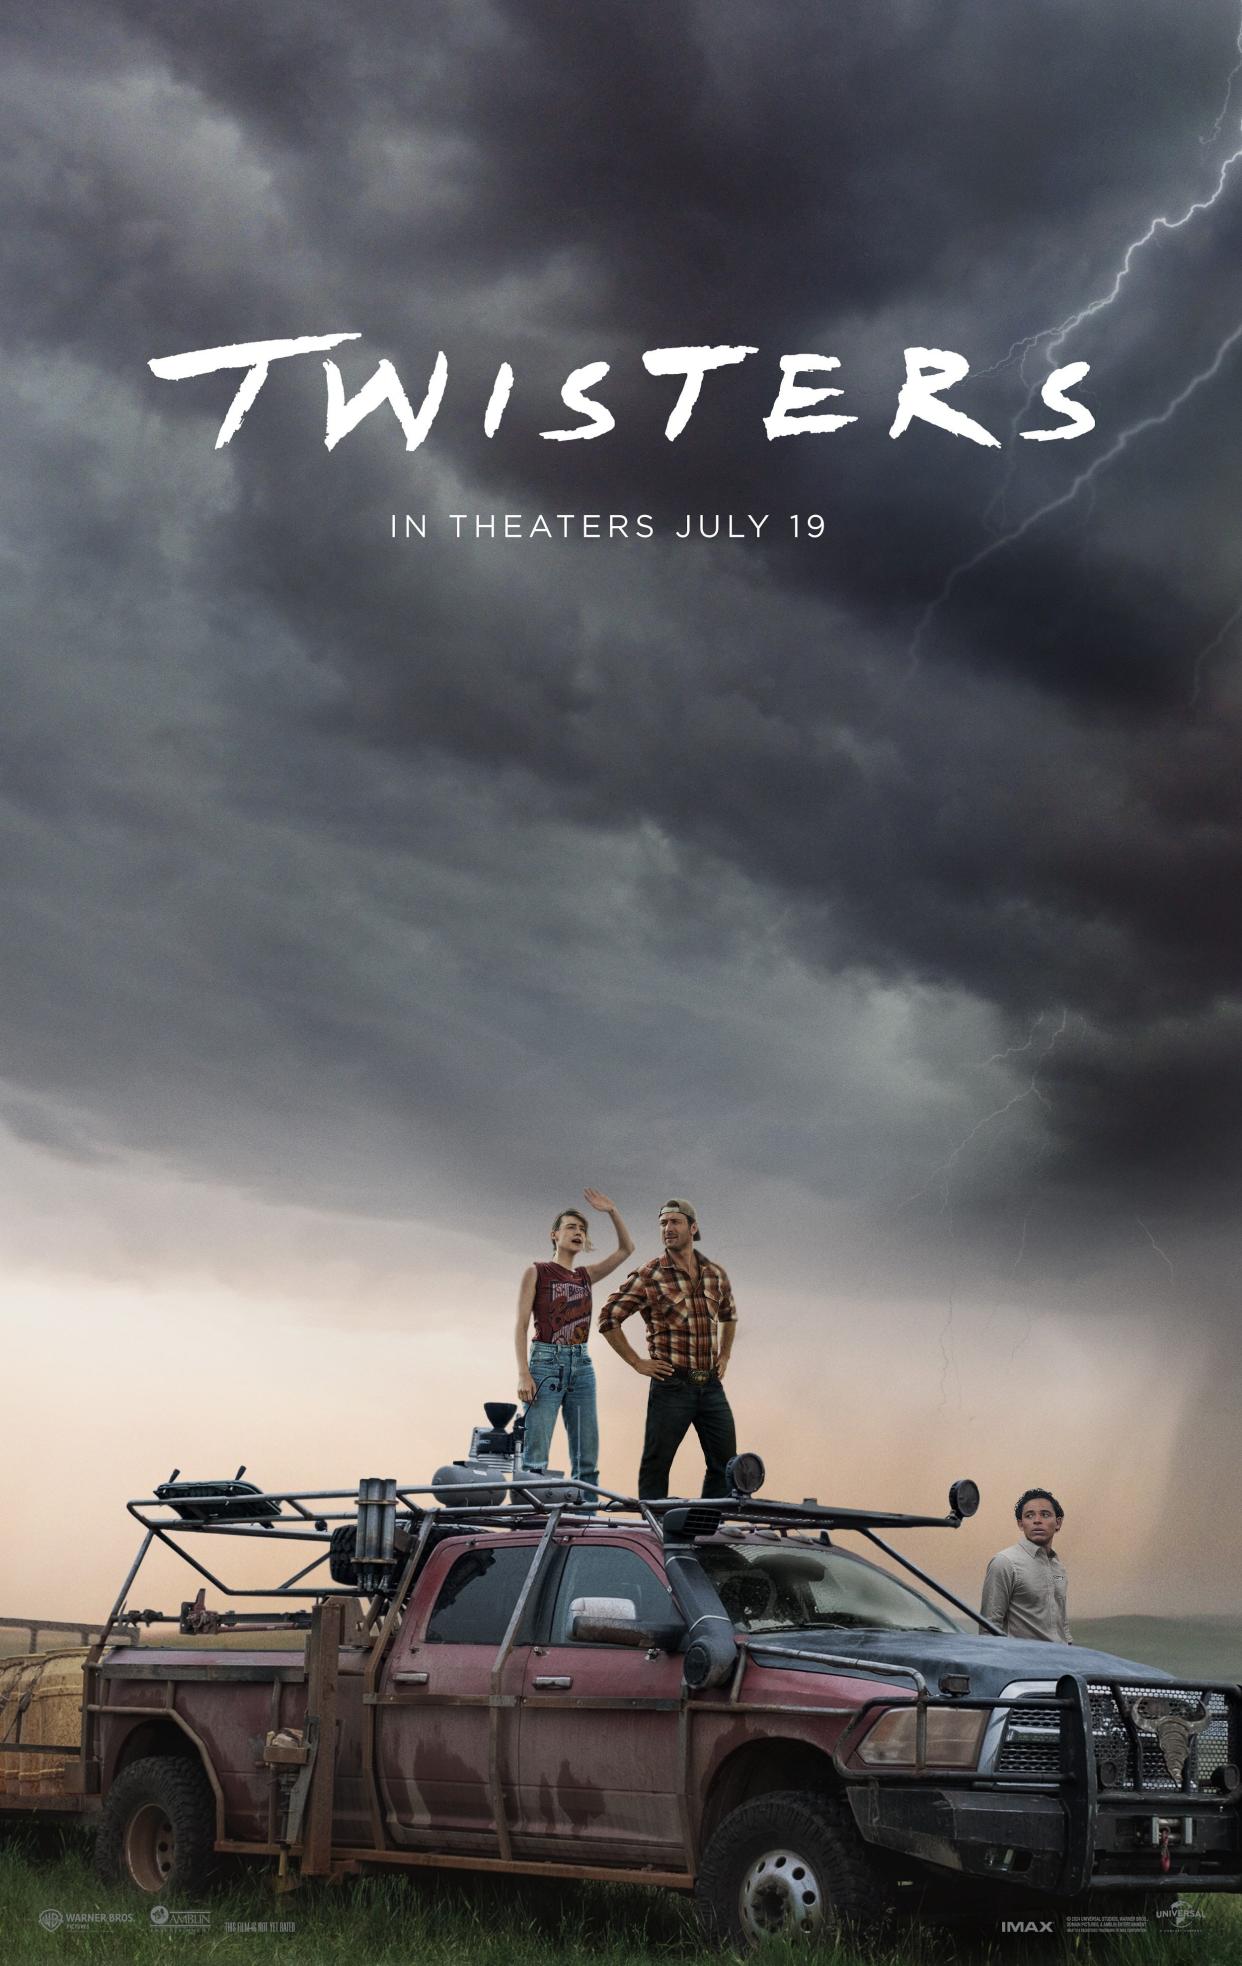 Daisy Edgar-Jones, Glen Powell and Anthony Ramos appear in a new poster for the movie "Twisters."